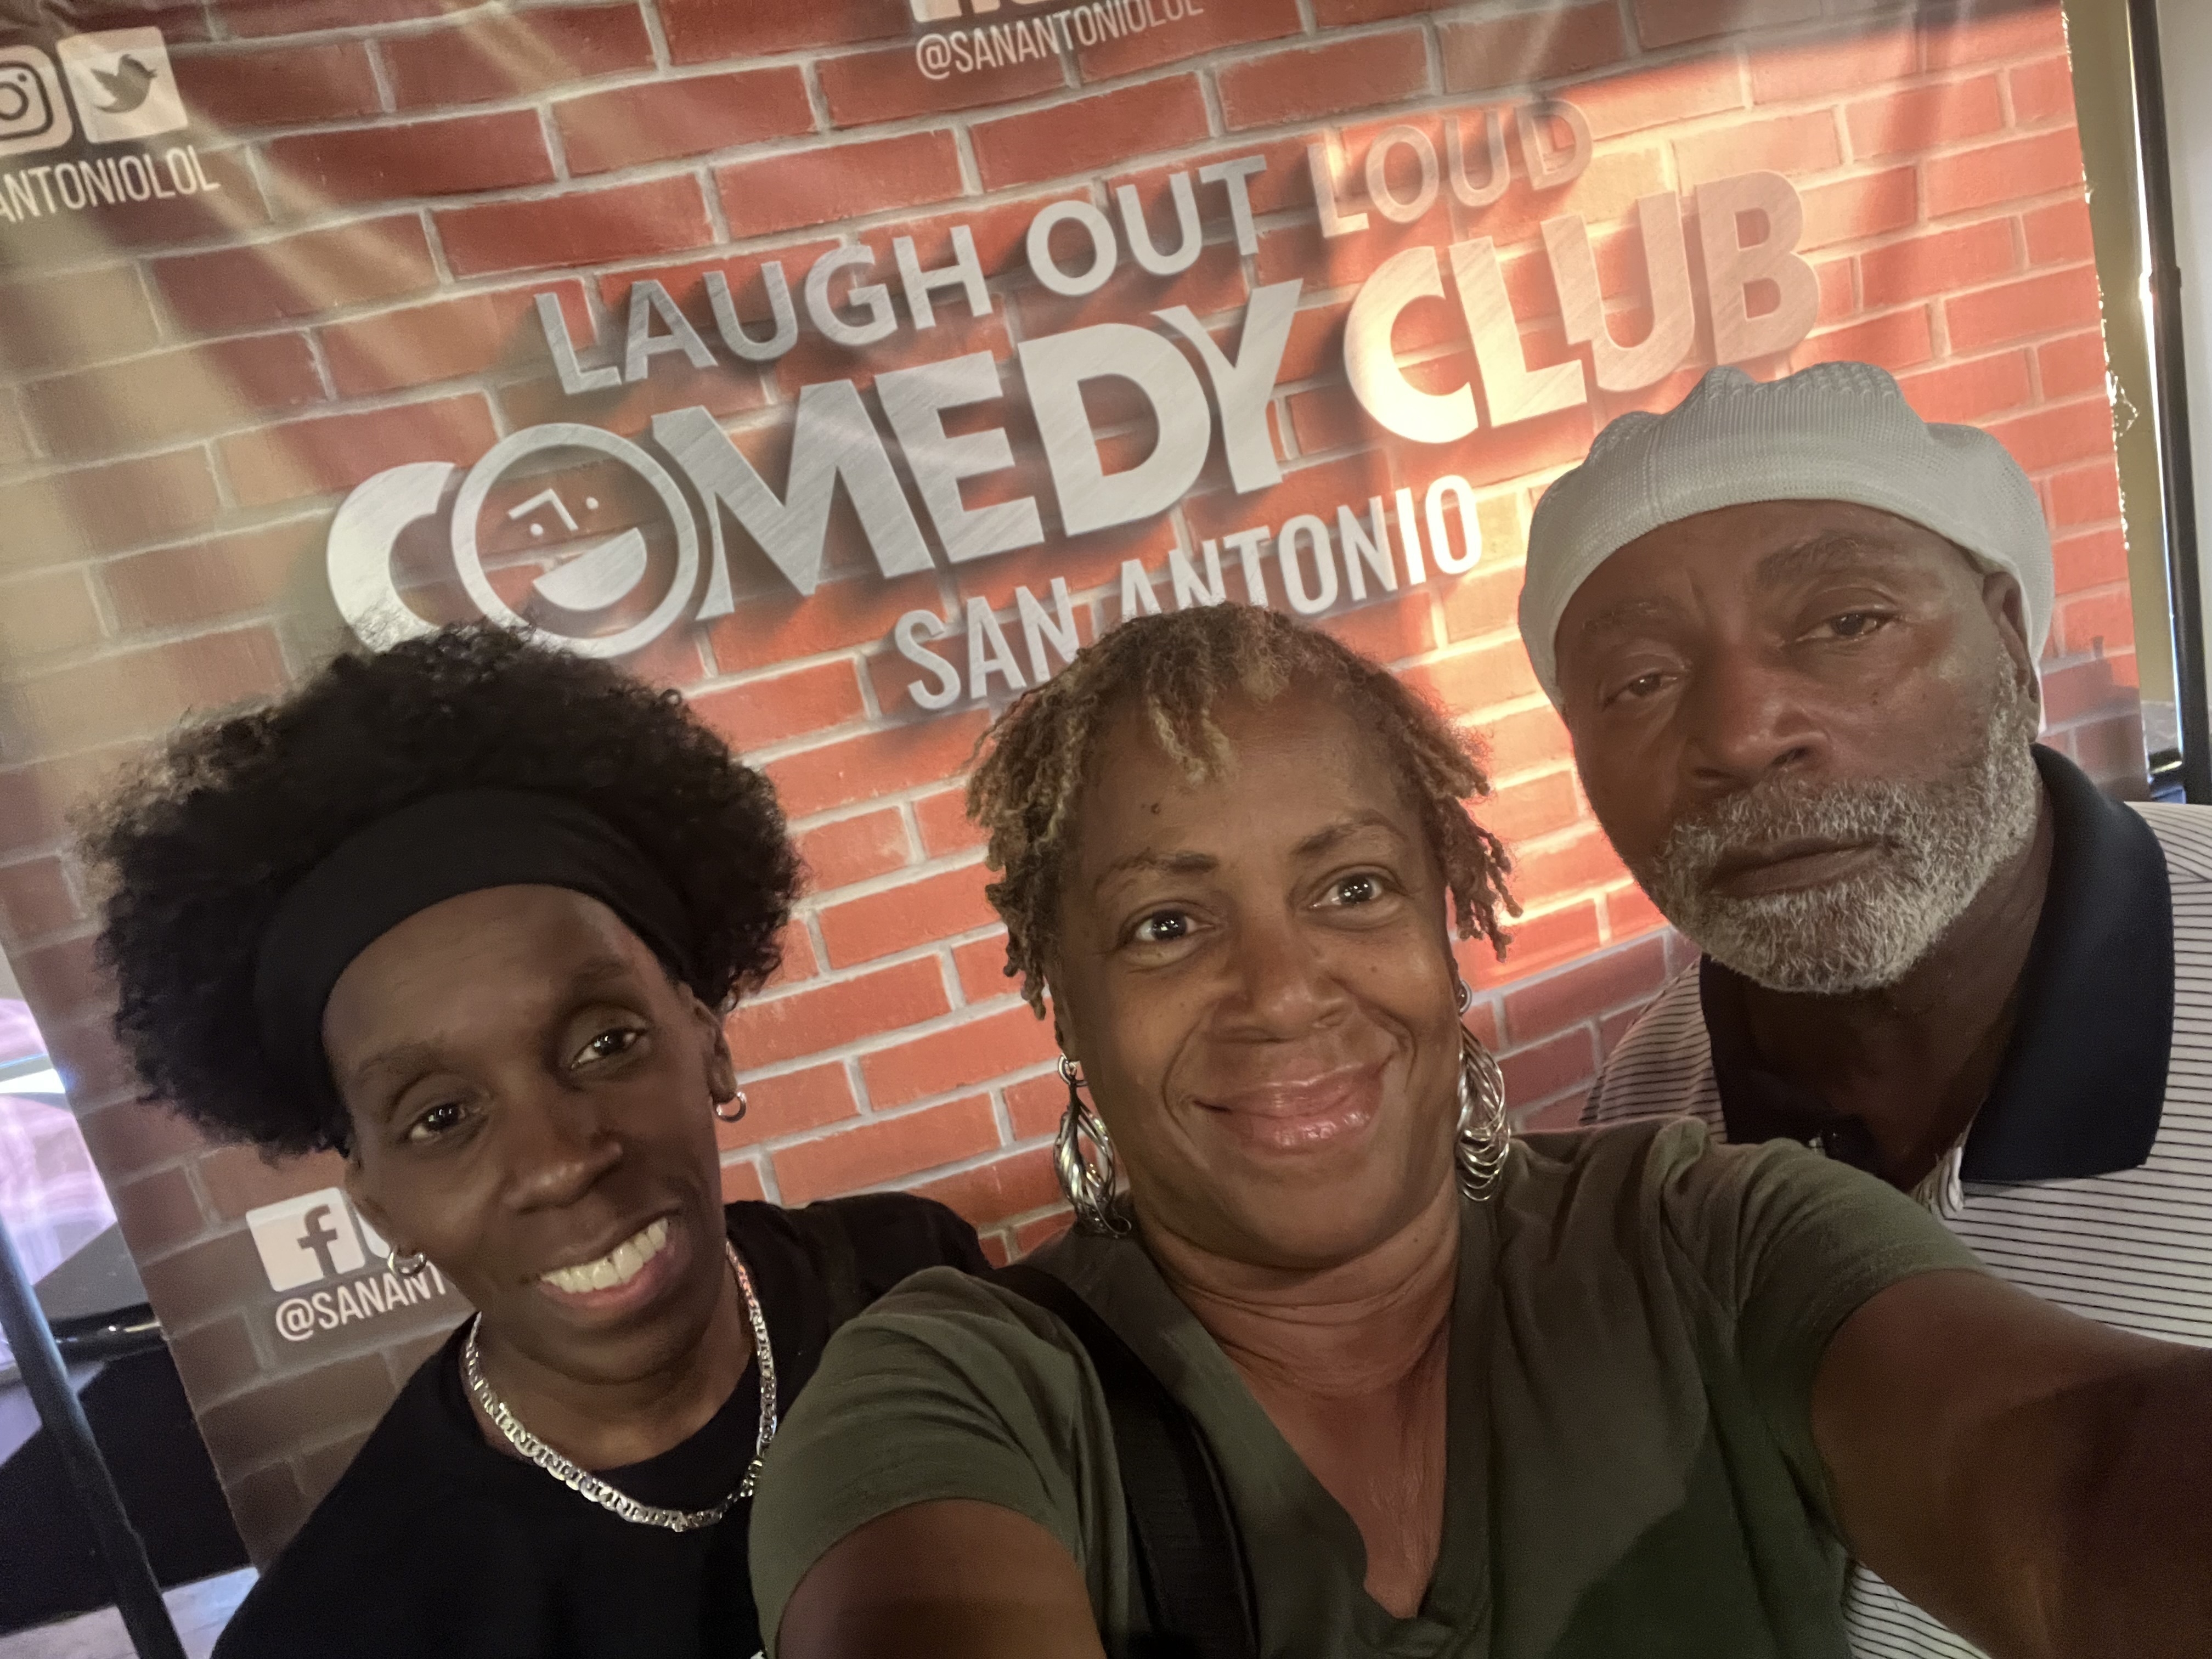 Drag Out Loud in San Antonio at Laugh Out Loud Comedy Club